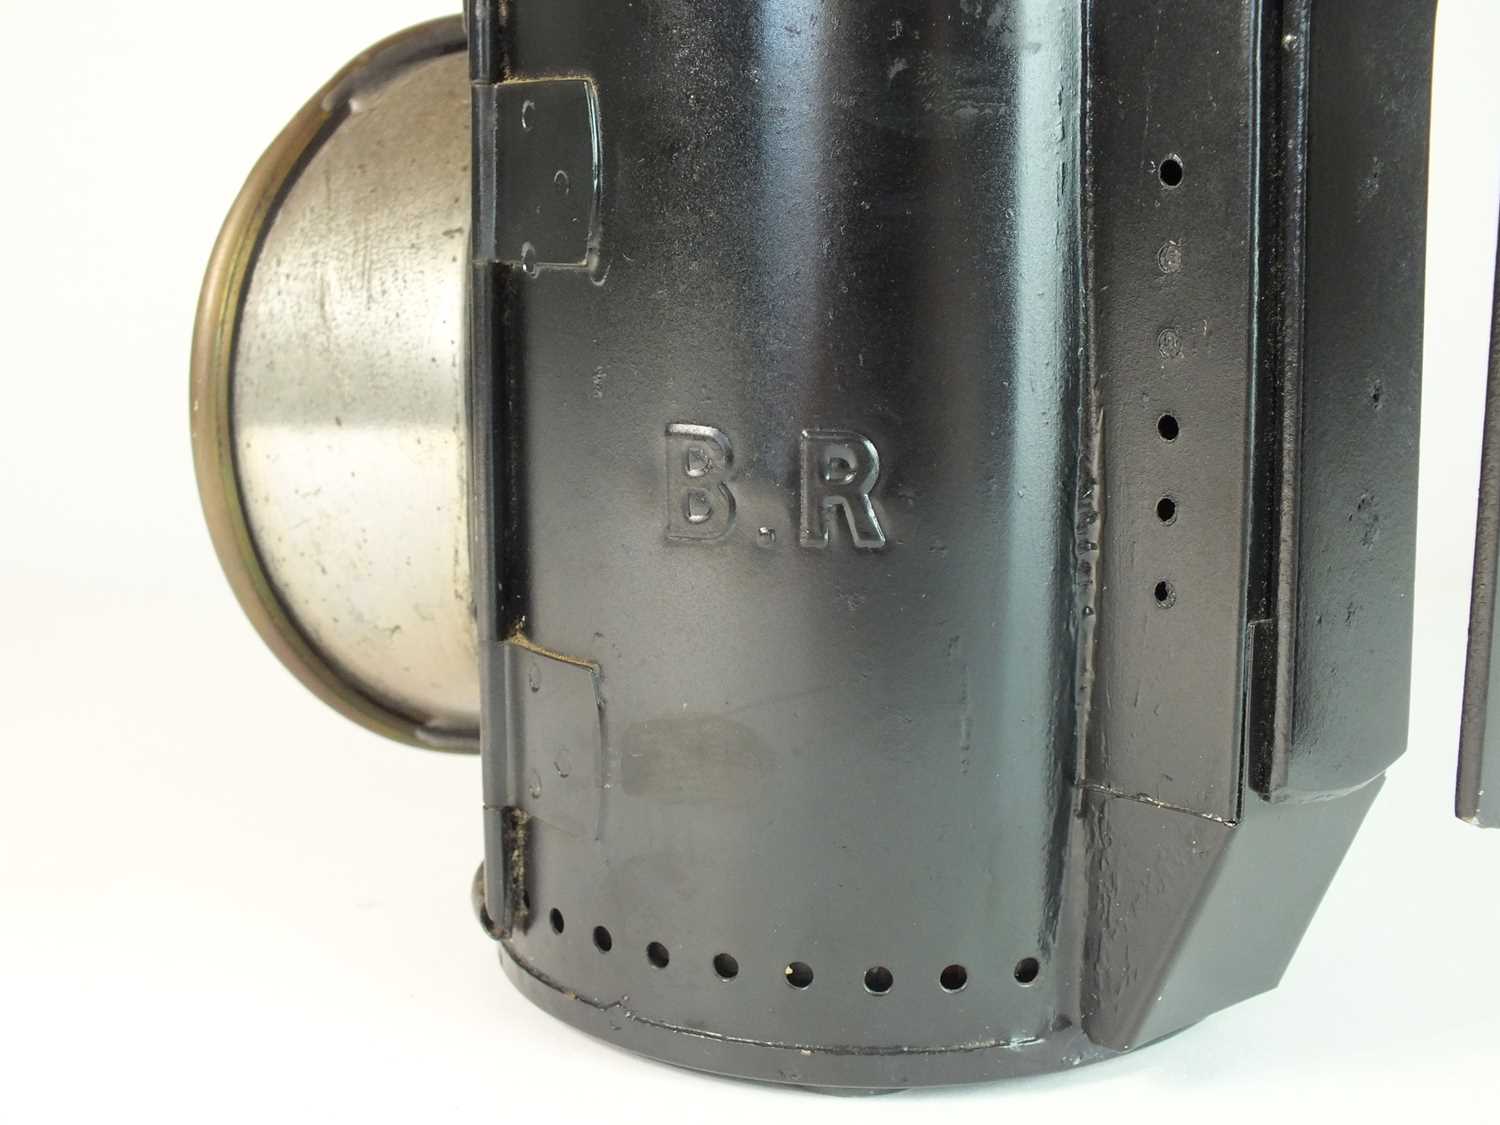 A British Railway metal lantern, probably a reproduction - Image 4 of 4